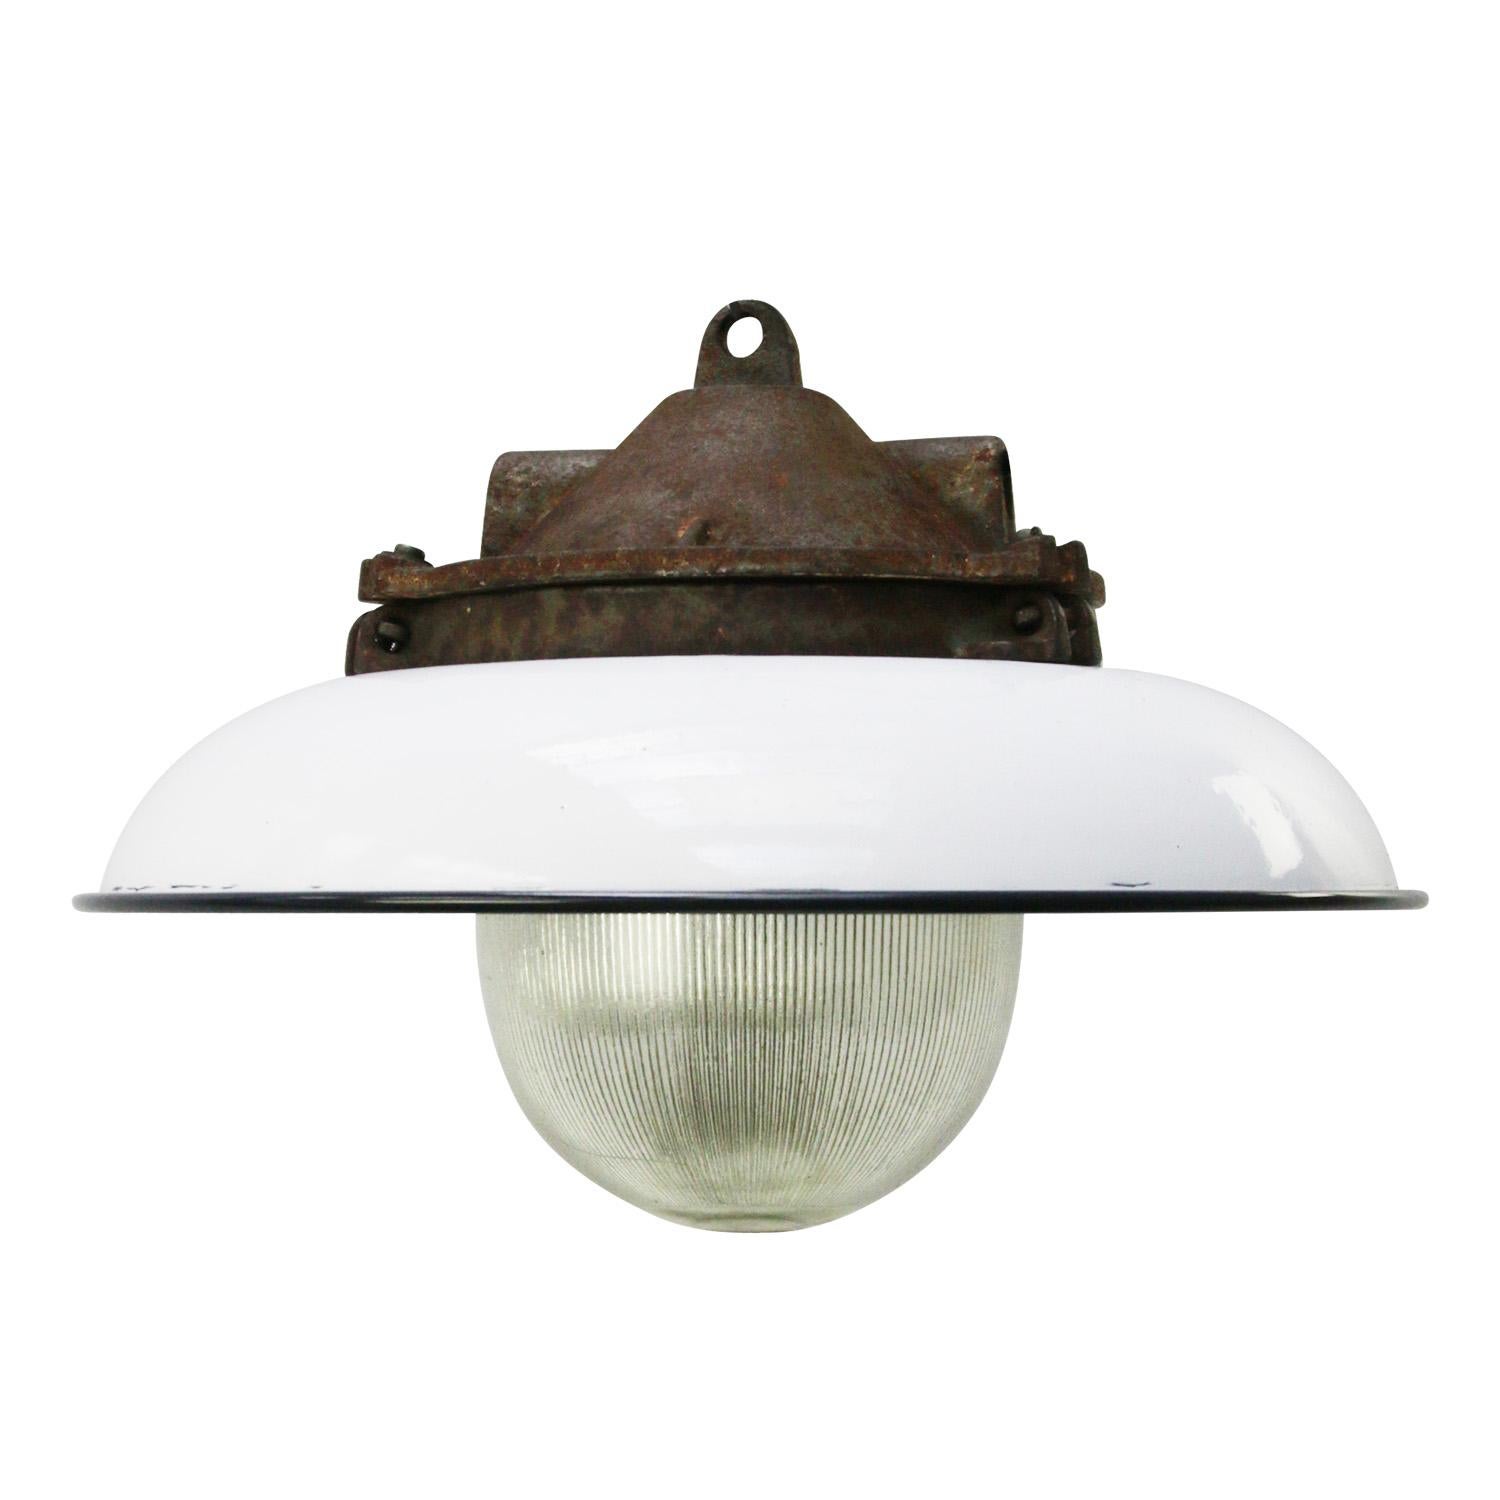 Industrial factory pendant. White enamel shade. Cast iron top. Striped glass.

Weight: 6.0 kg / 13.2 lb

Priced per individual item. All lamps have been made suitable by international standards for incandescent light bulbs, energy-efficient and